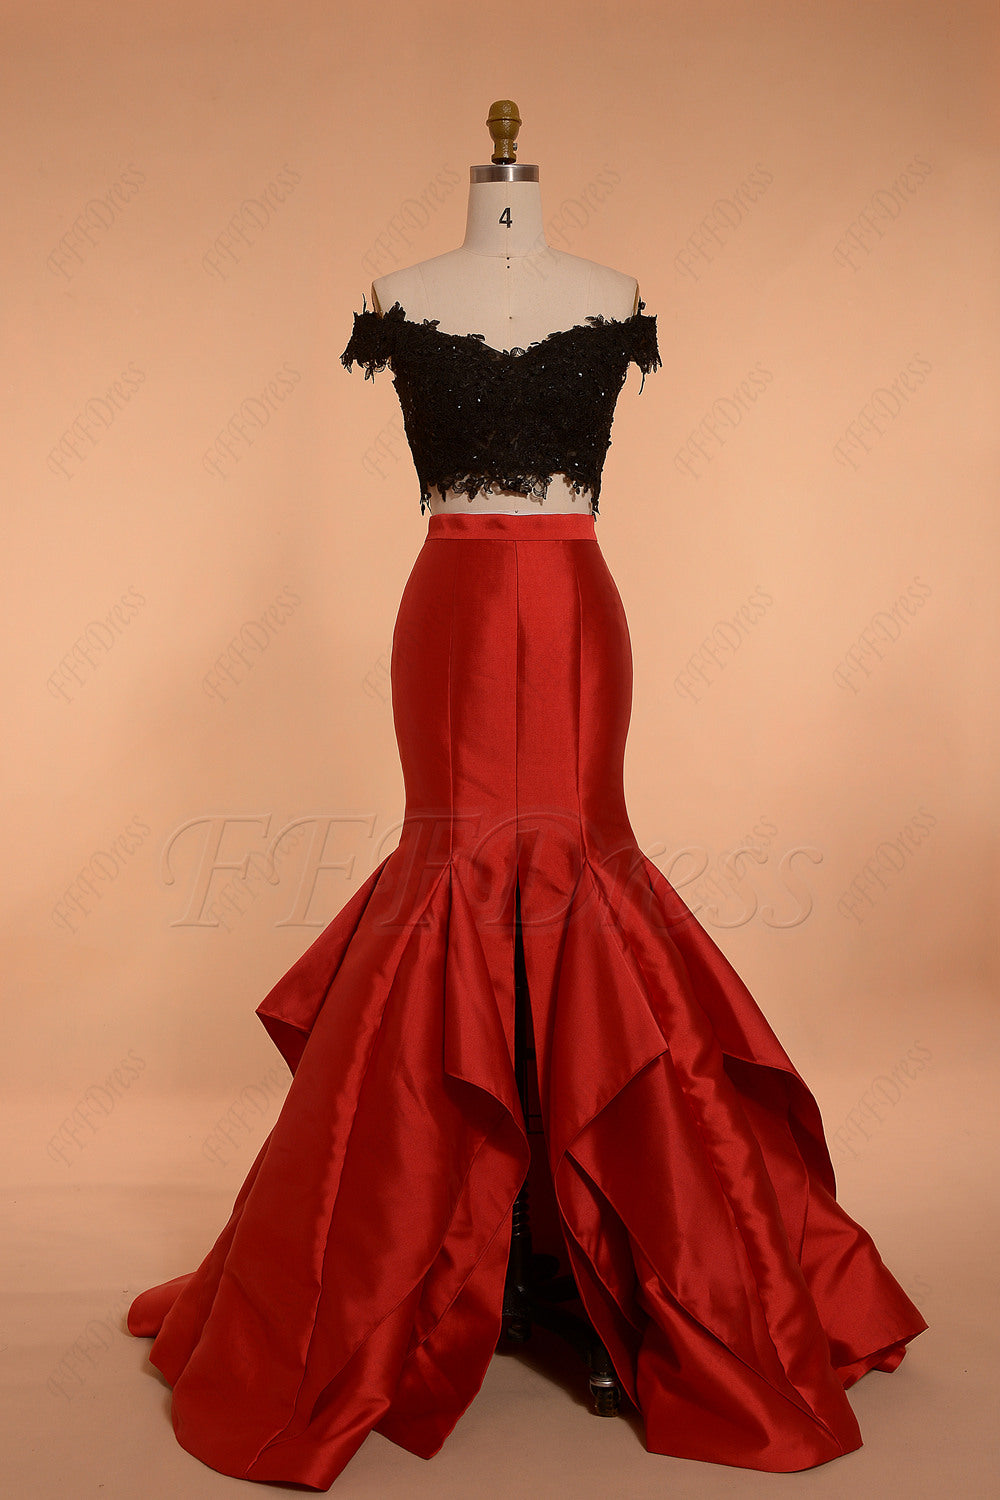 Red Black two piece mermaid prom dress long